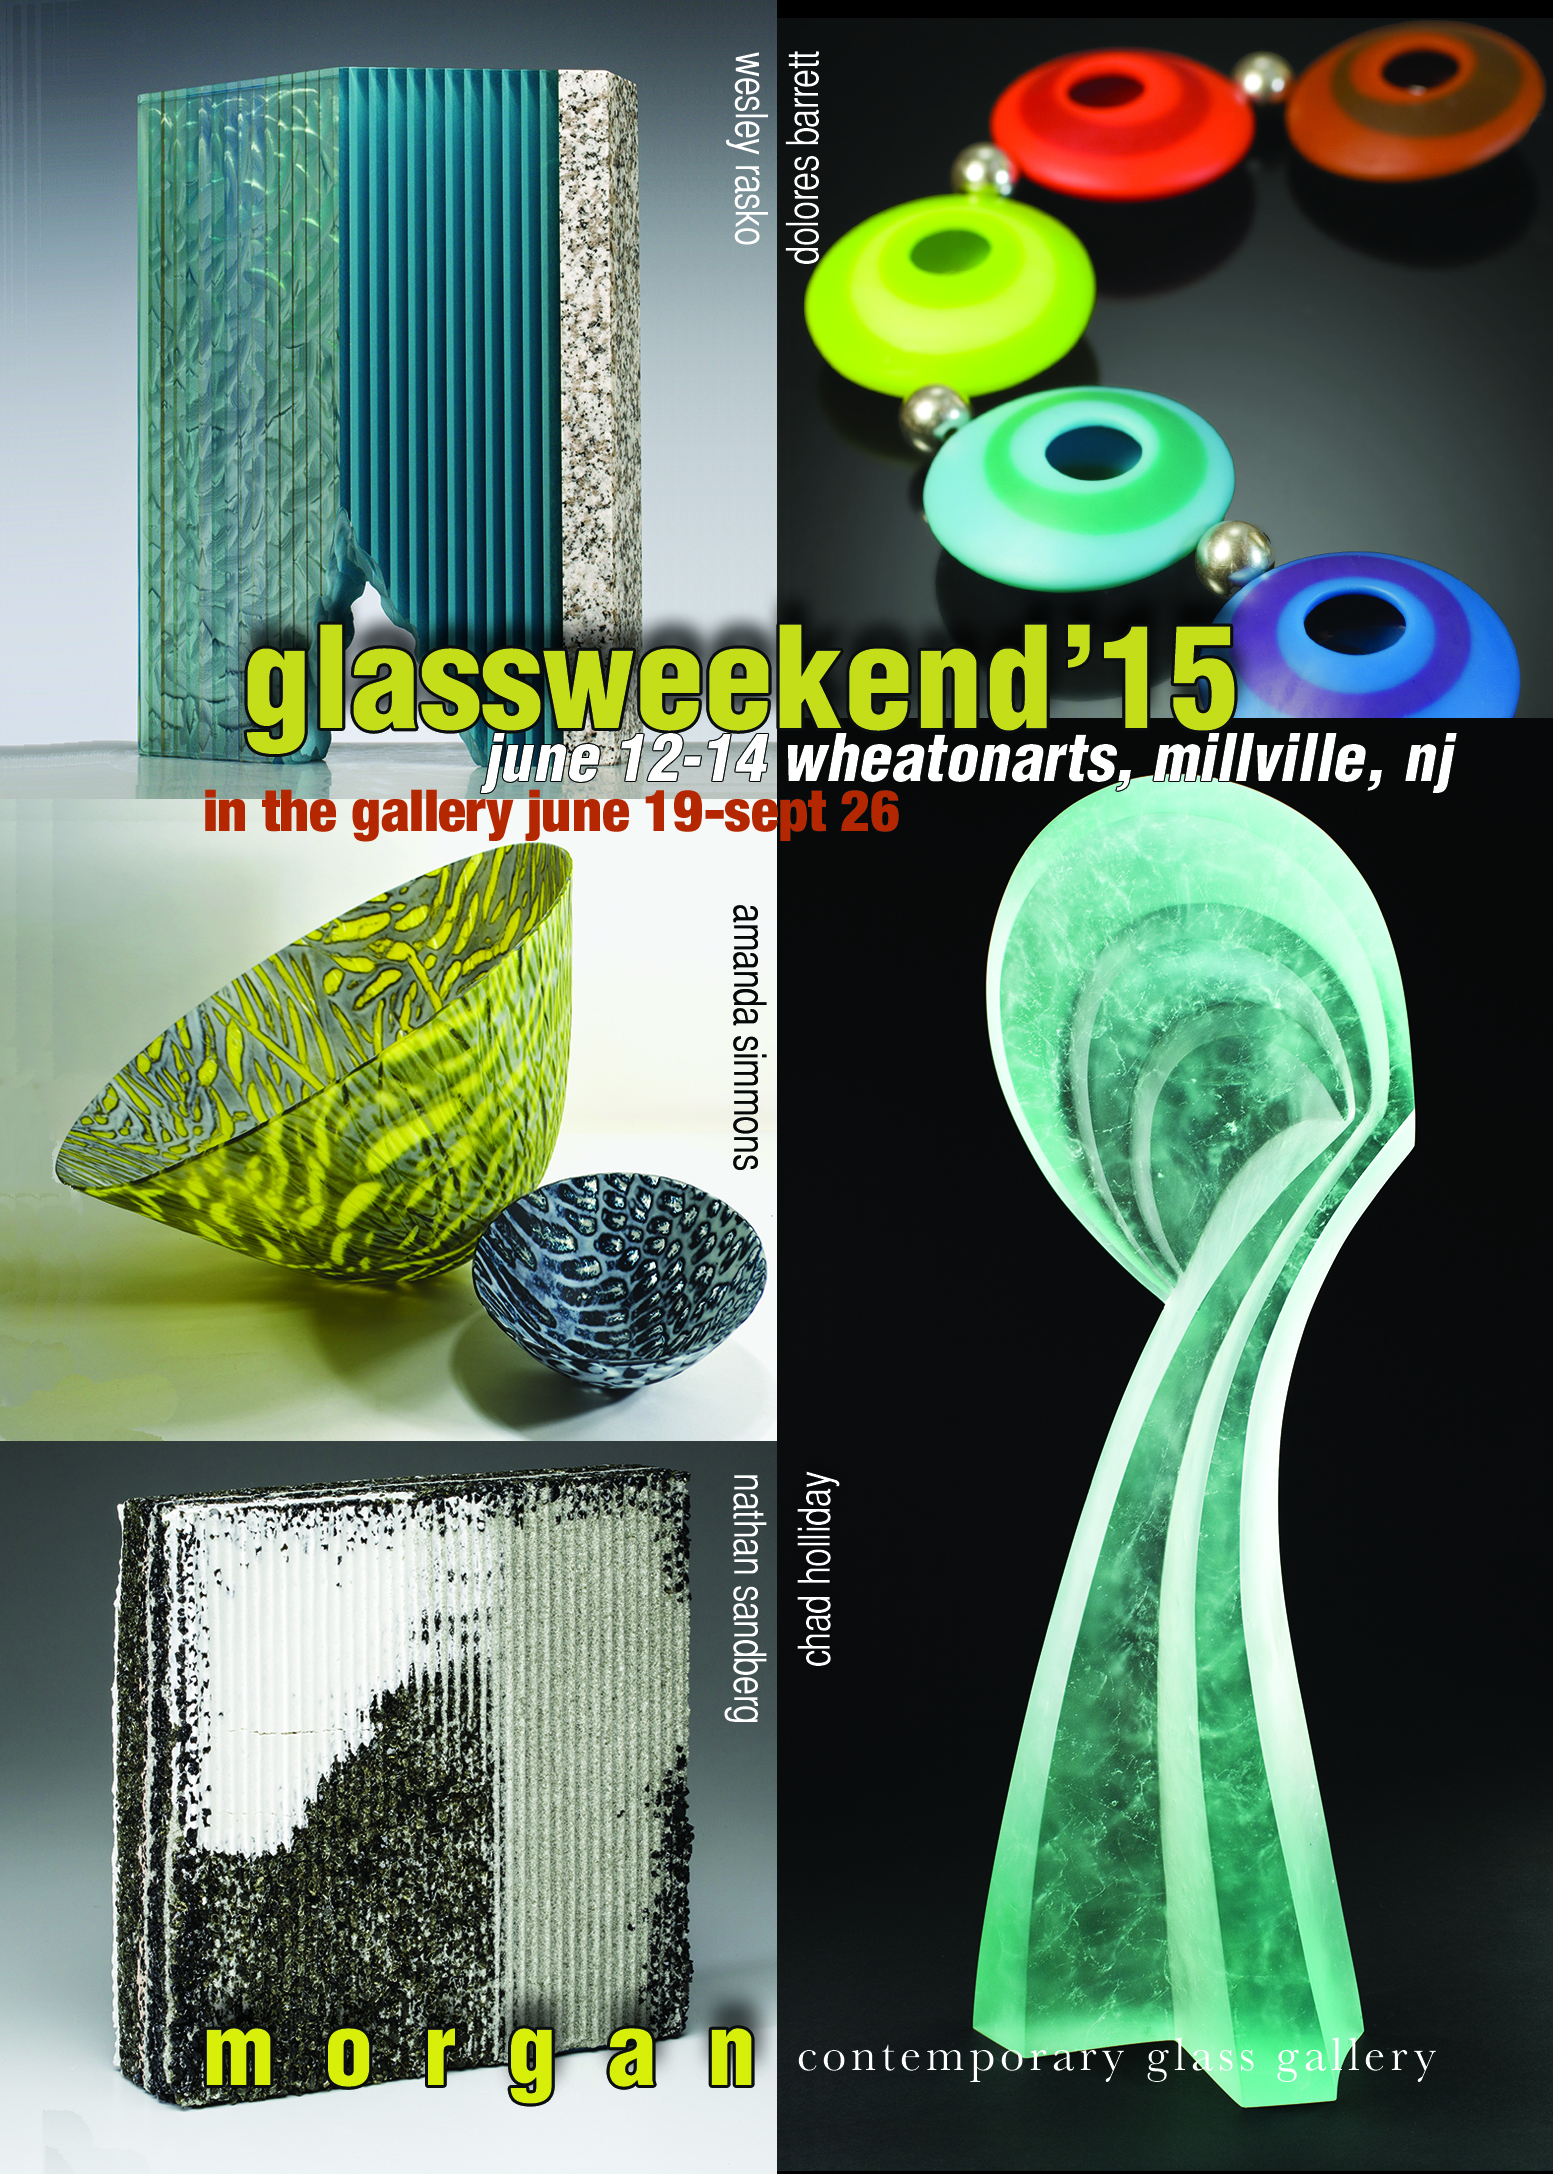 Visit Morgan Contemporary Glass Gallery's glassweekend '15 exhibition.